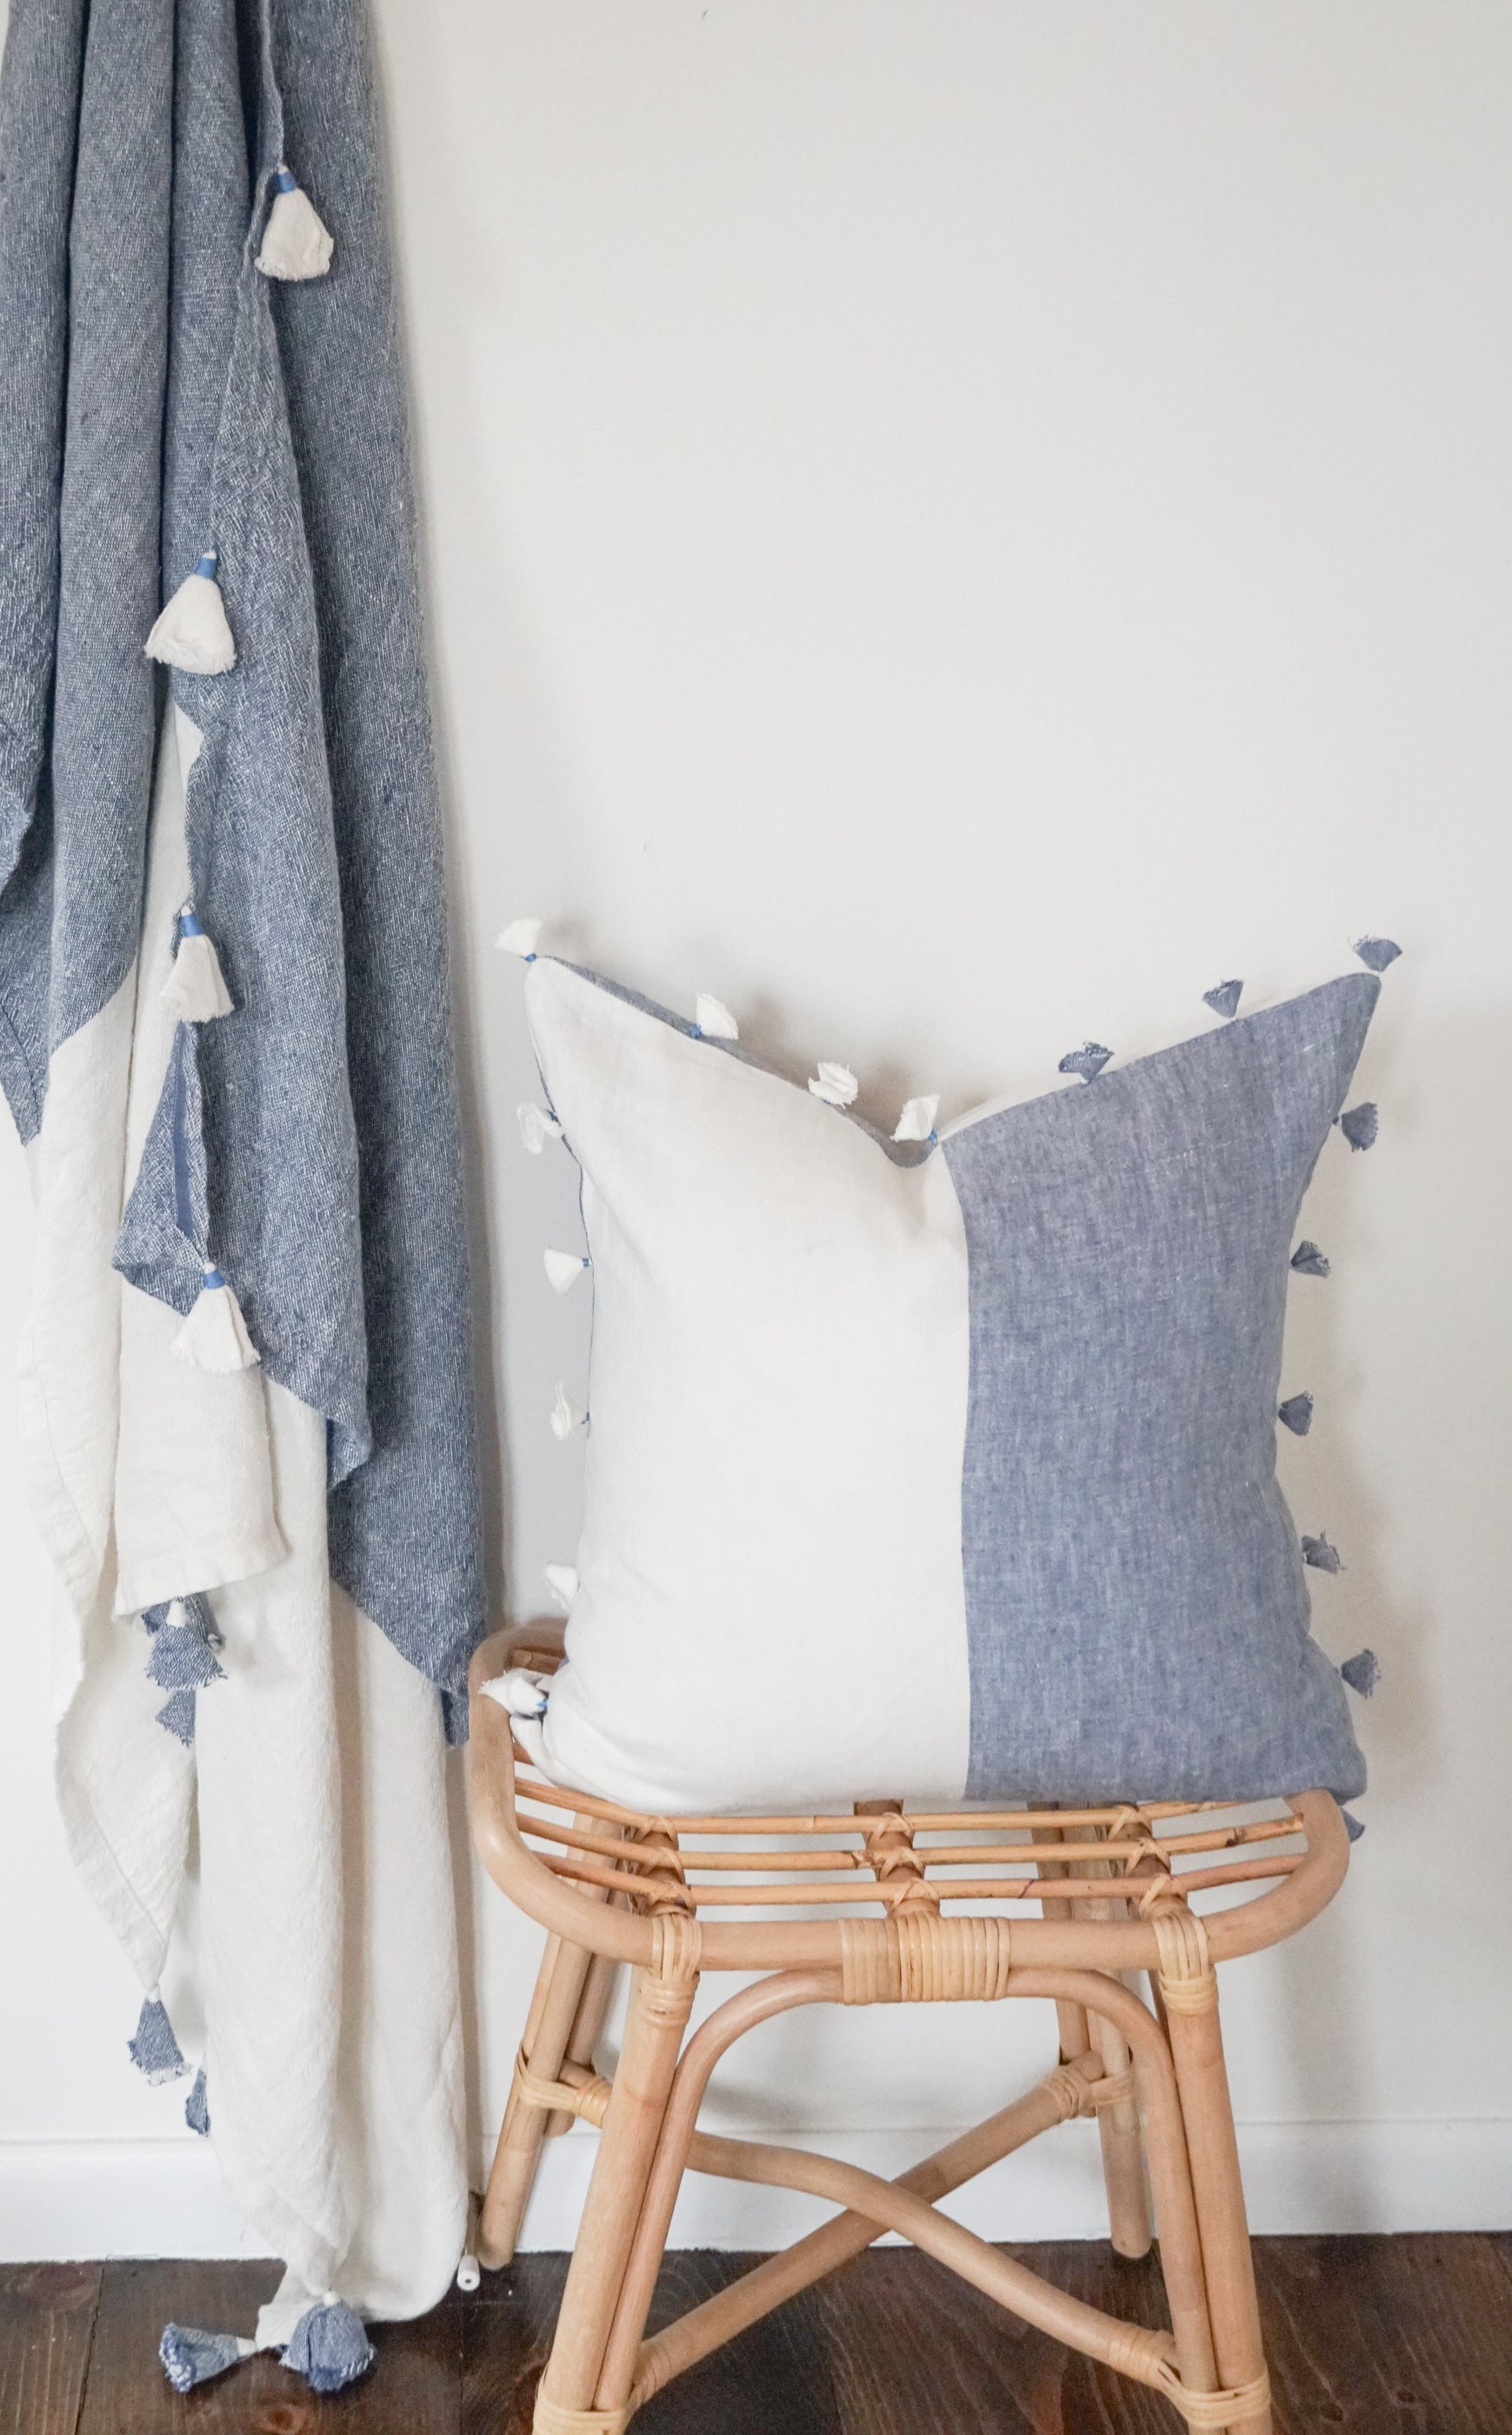 Chambray Blue Colorblocked Linen Blanket with Tassels